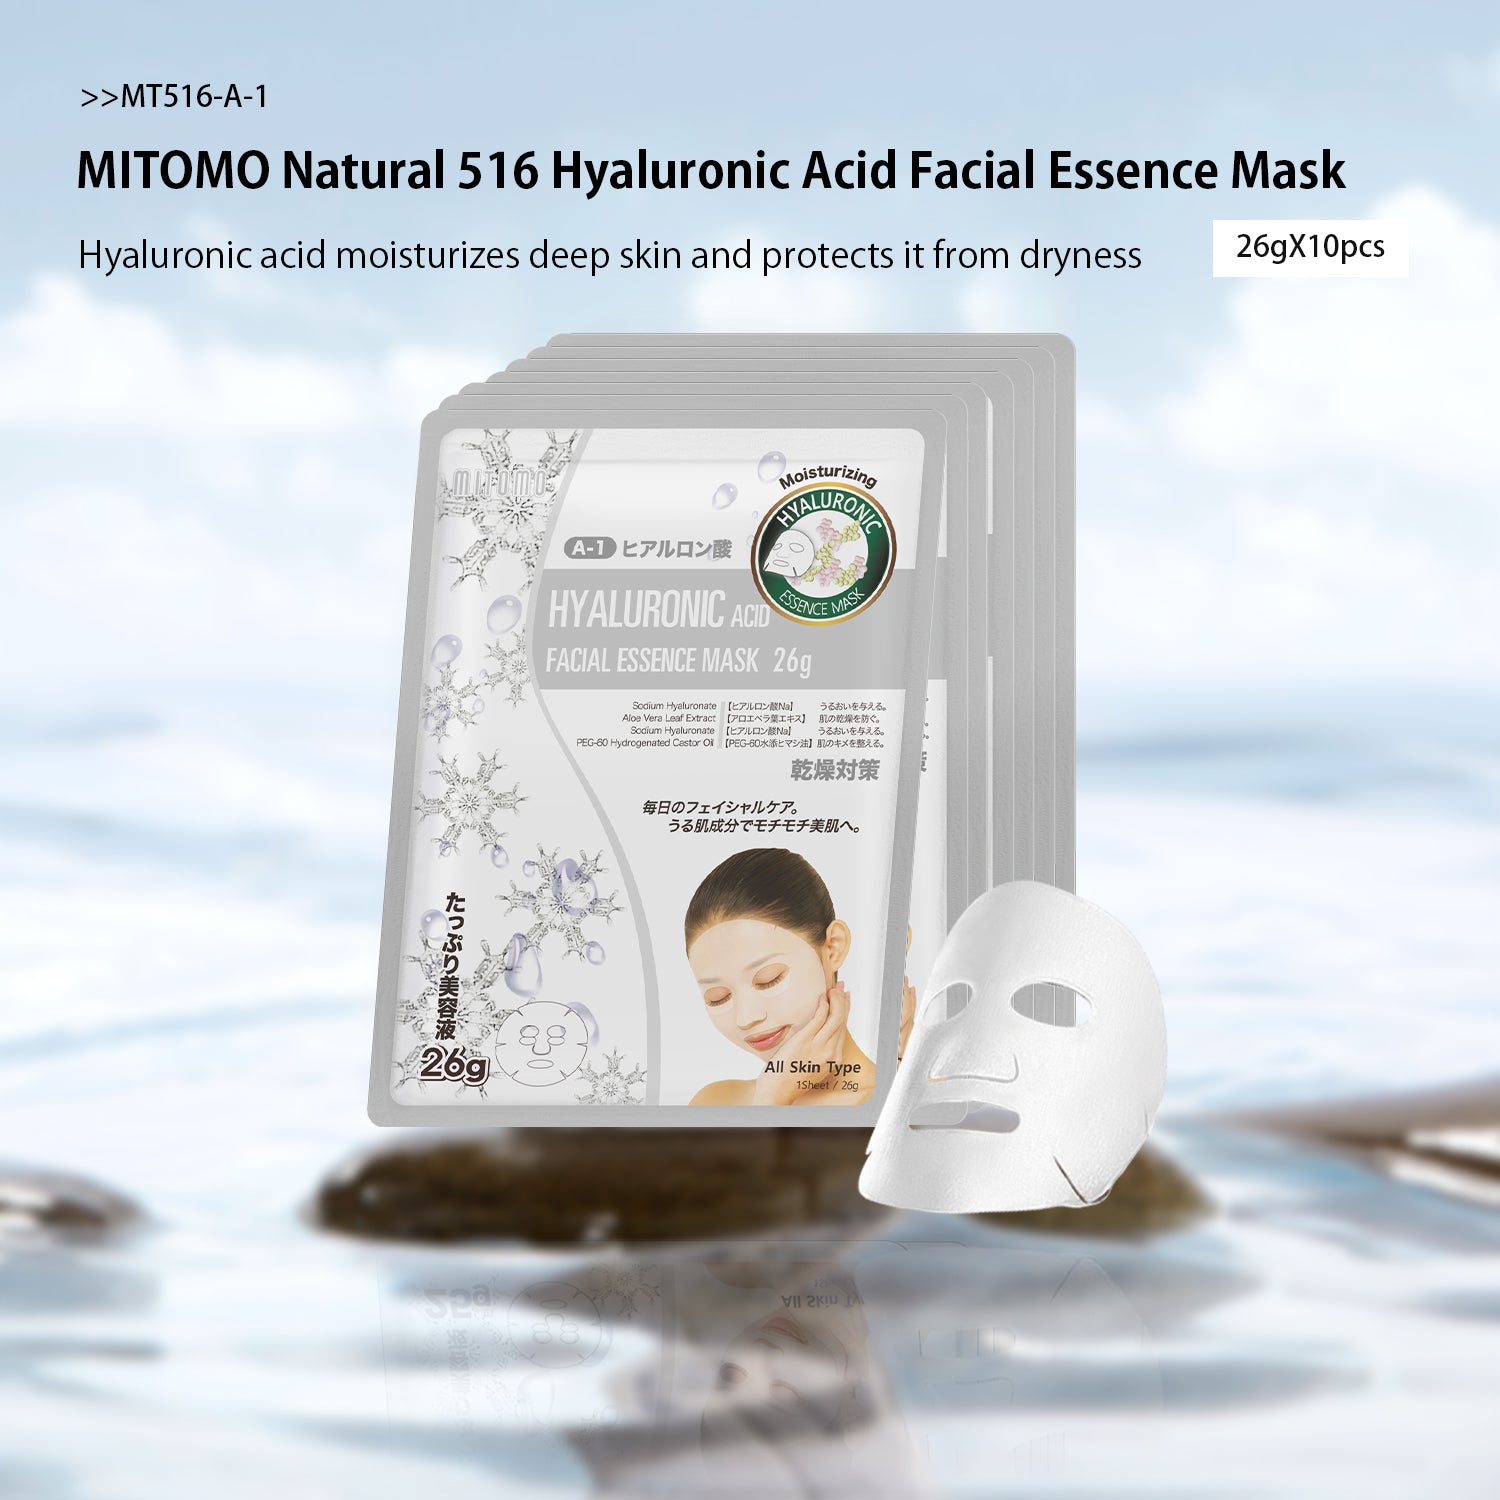 MITOMO Natural 516 Hyaluronic Acid Facial Essence Mask[MTSS00516-A-1]